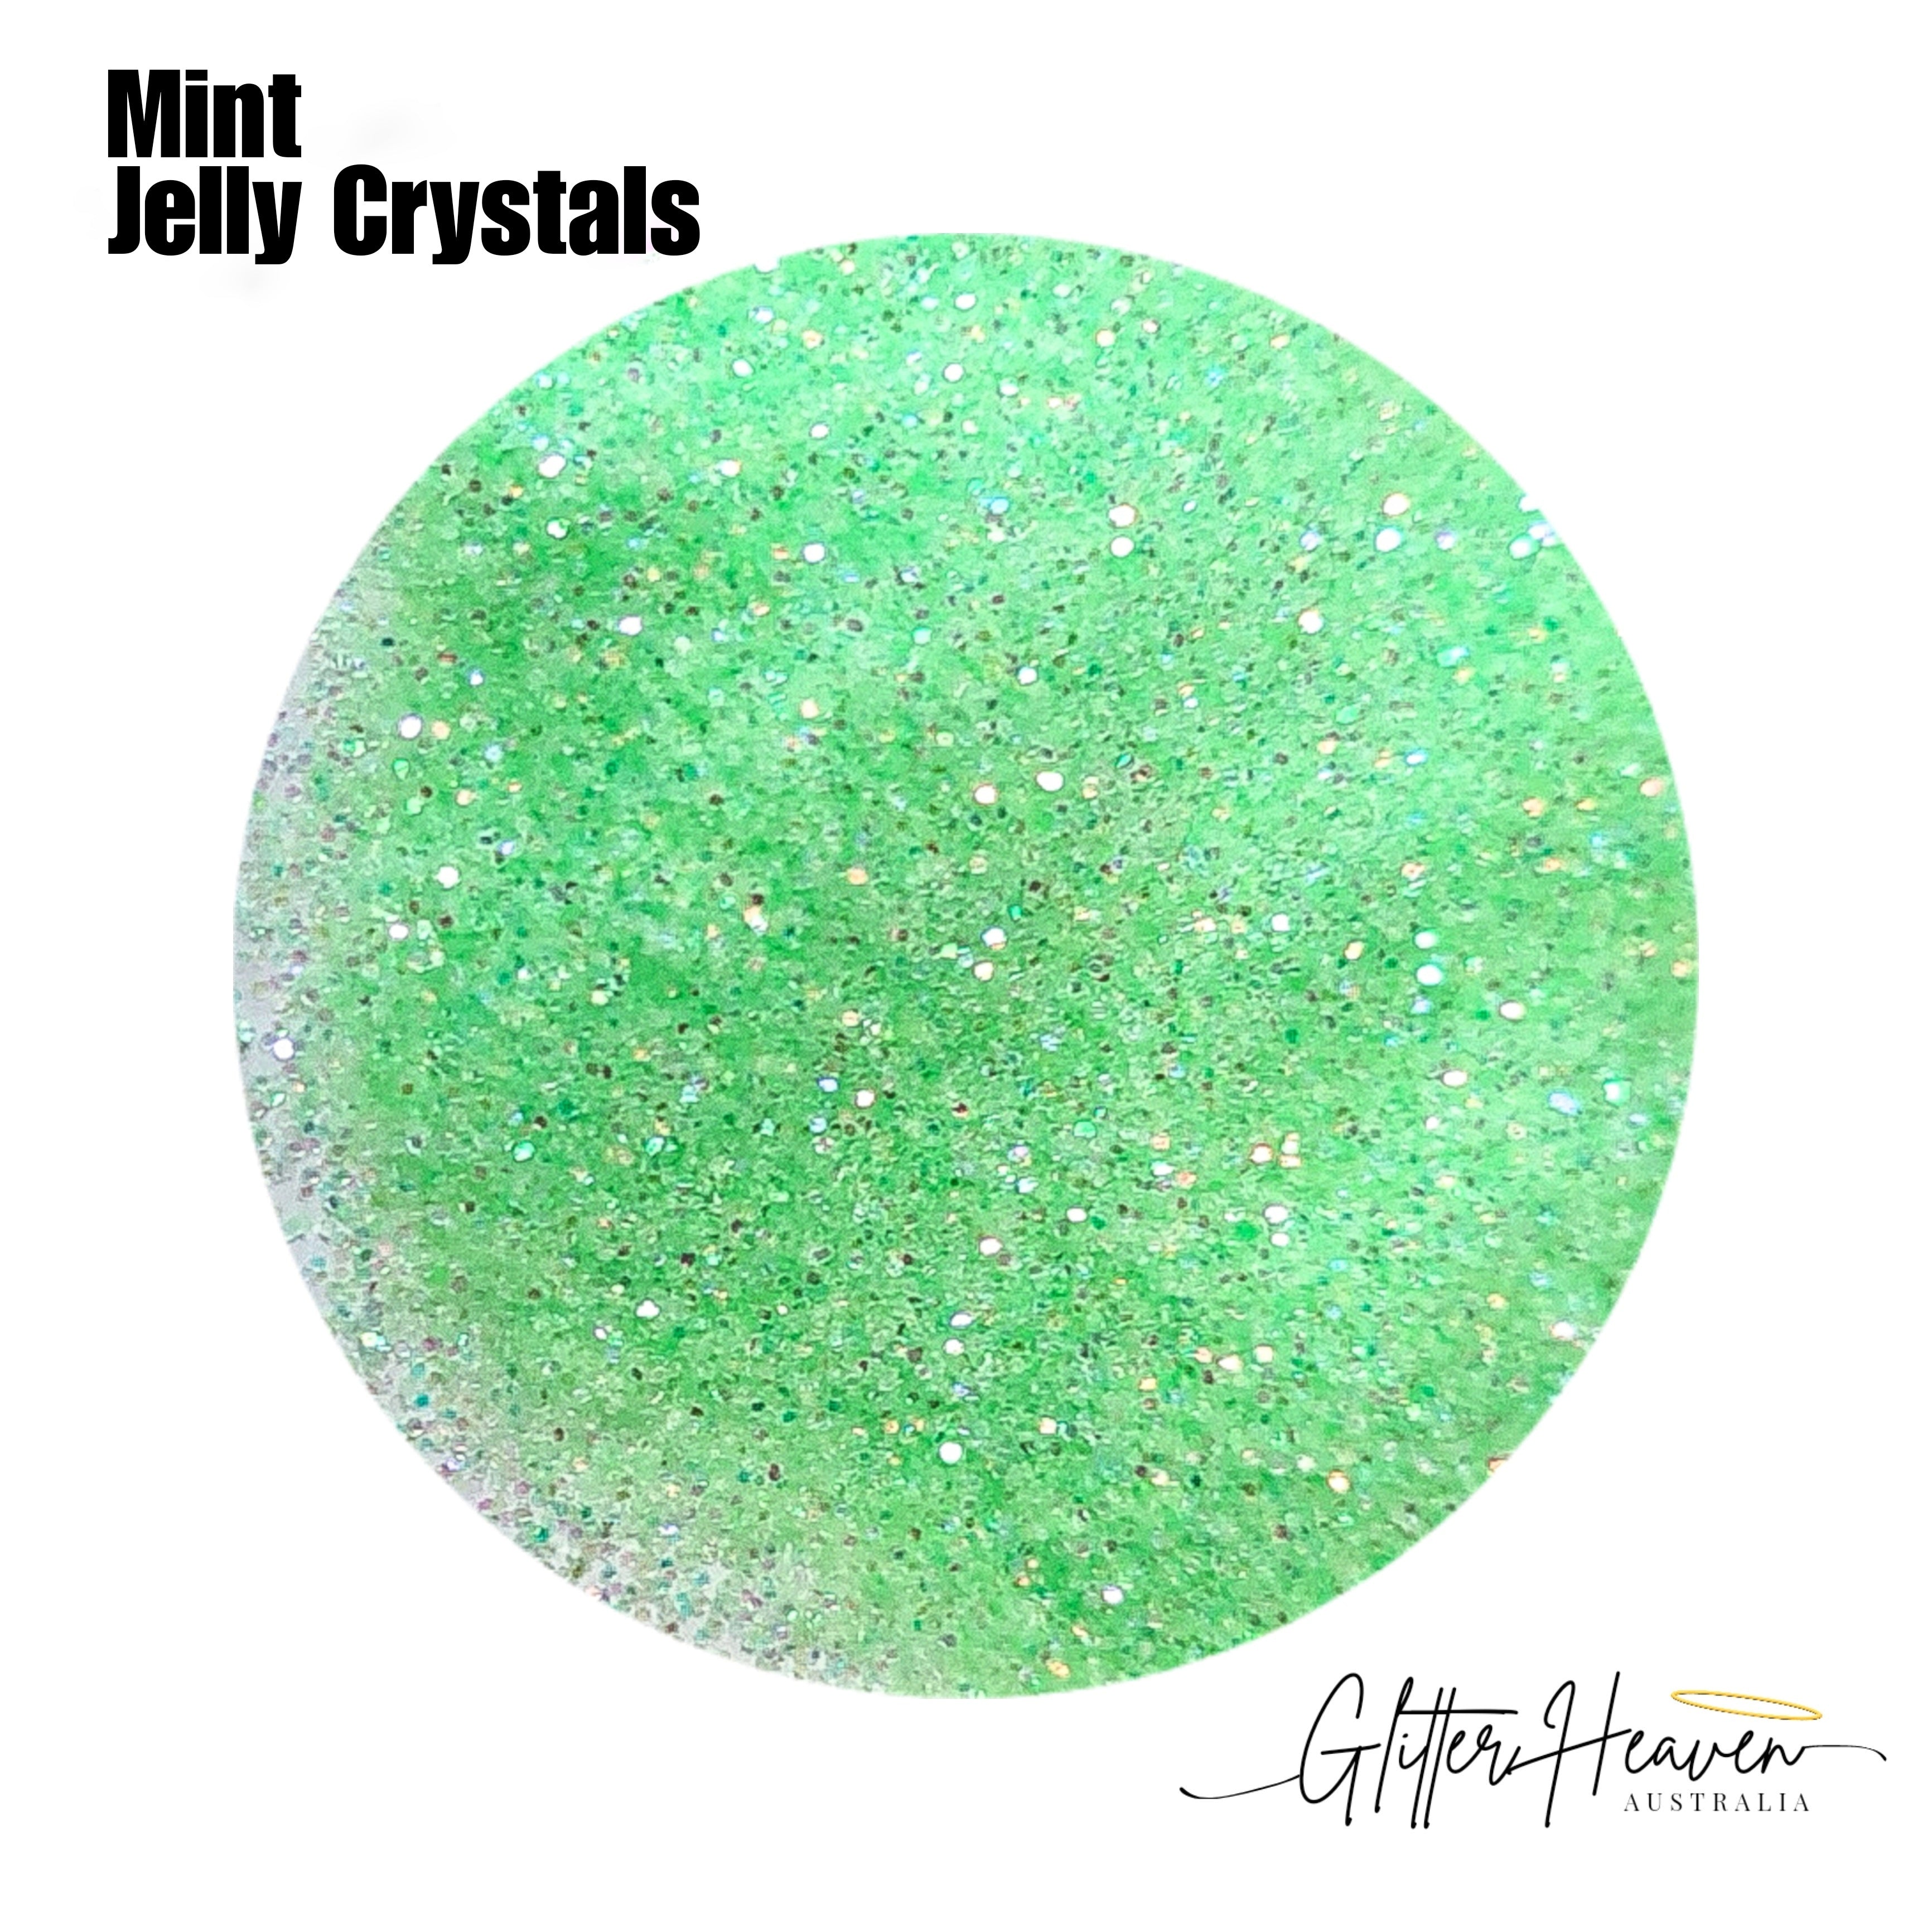 Mint Jelly Crystals